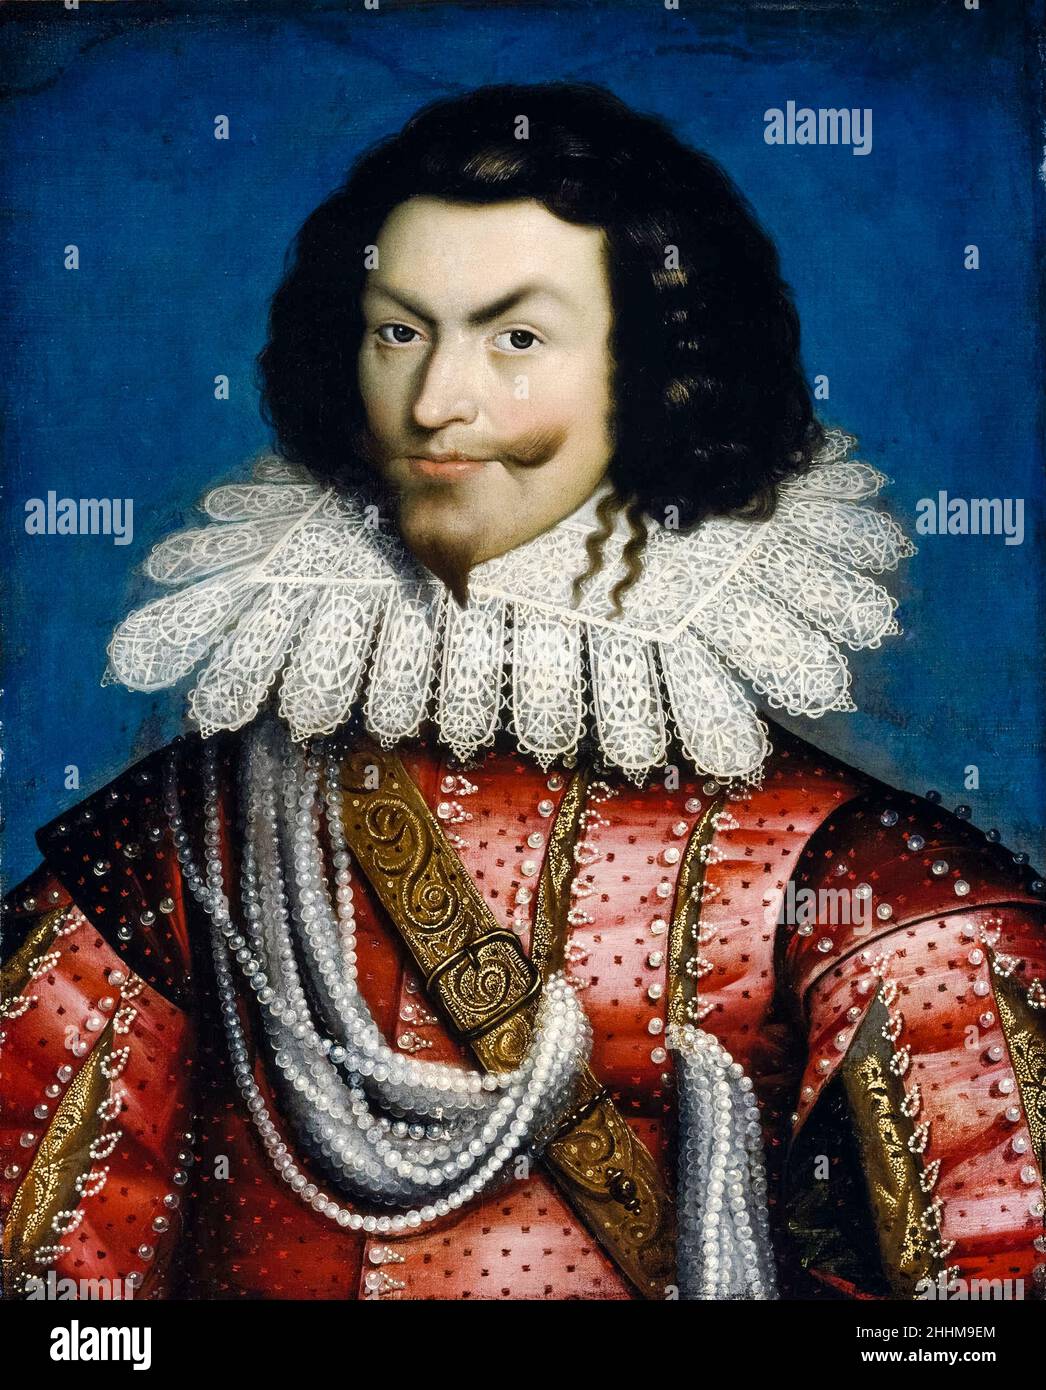 George Villiers (1592-1628), 1st Duke of Buckingham, English courtier, statesman and patron of the arts, portrait painting by Paul van Somer, 1576-1621 Stock Photo